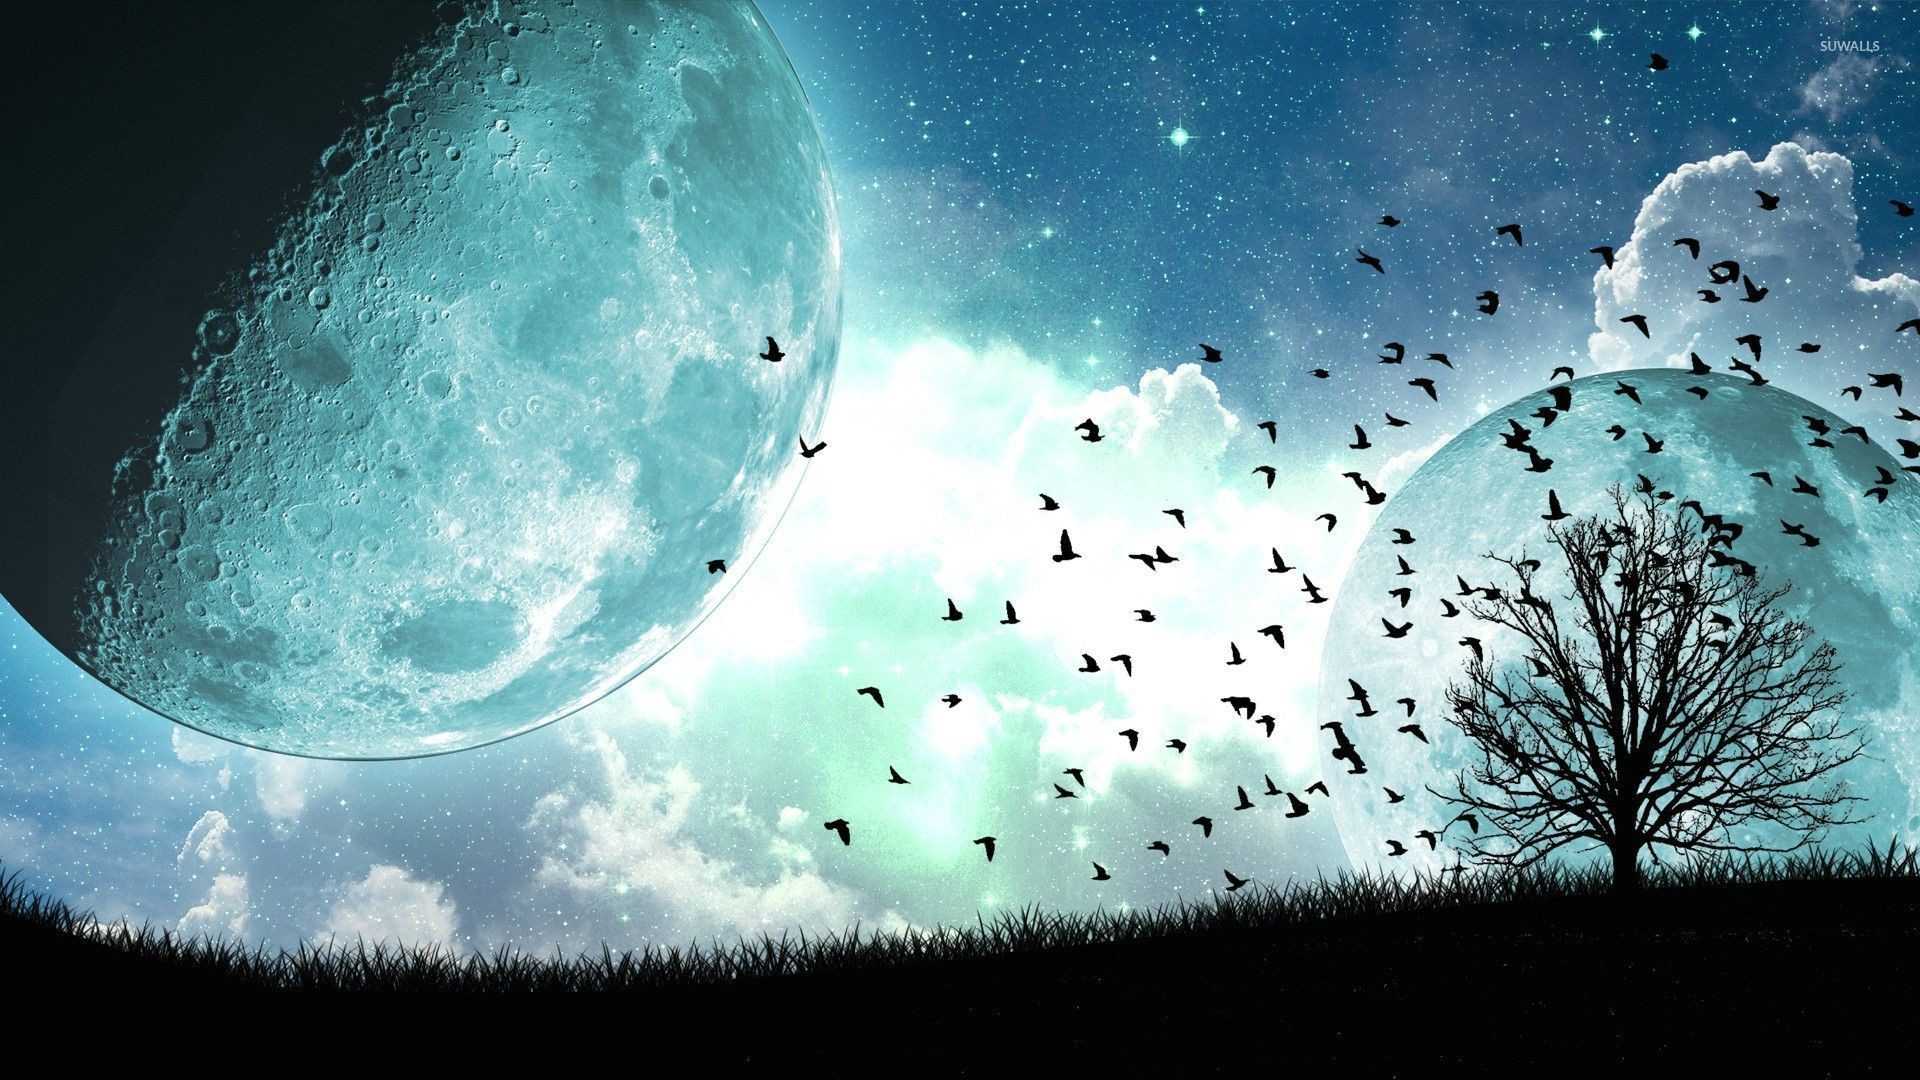 1920x1080 Birds and tree under the blue moon wallpaper